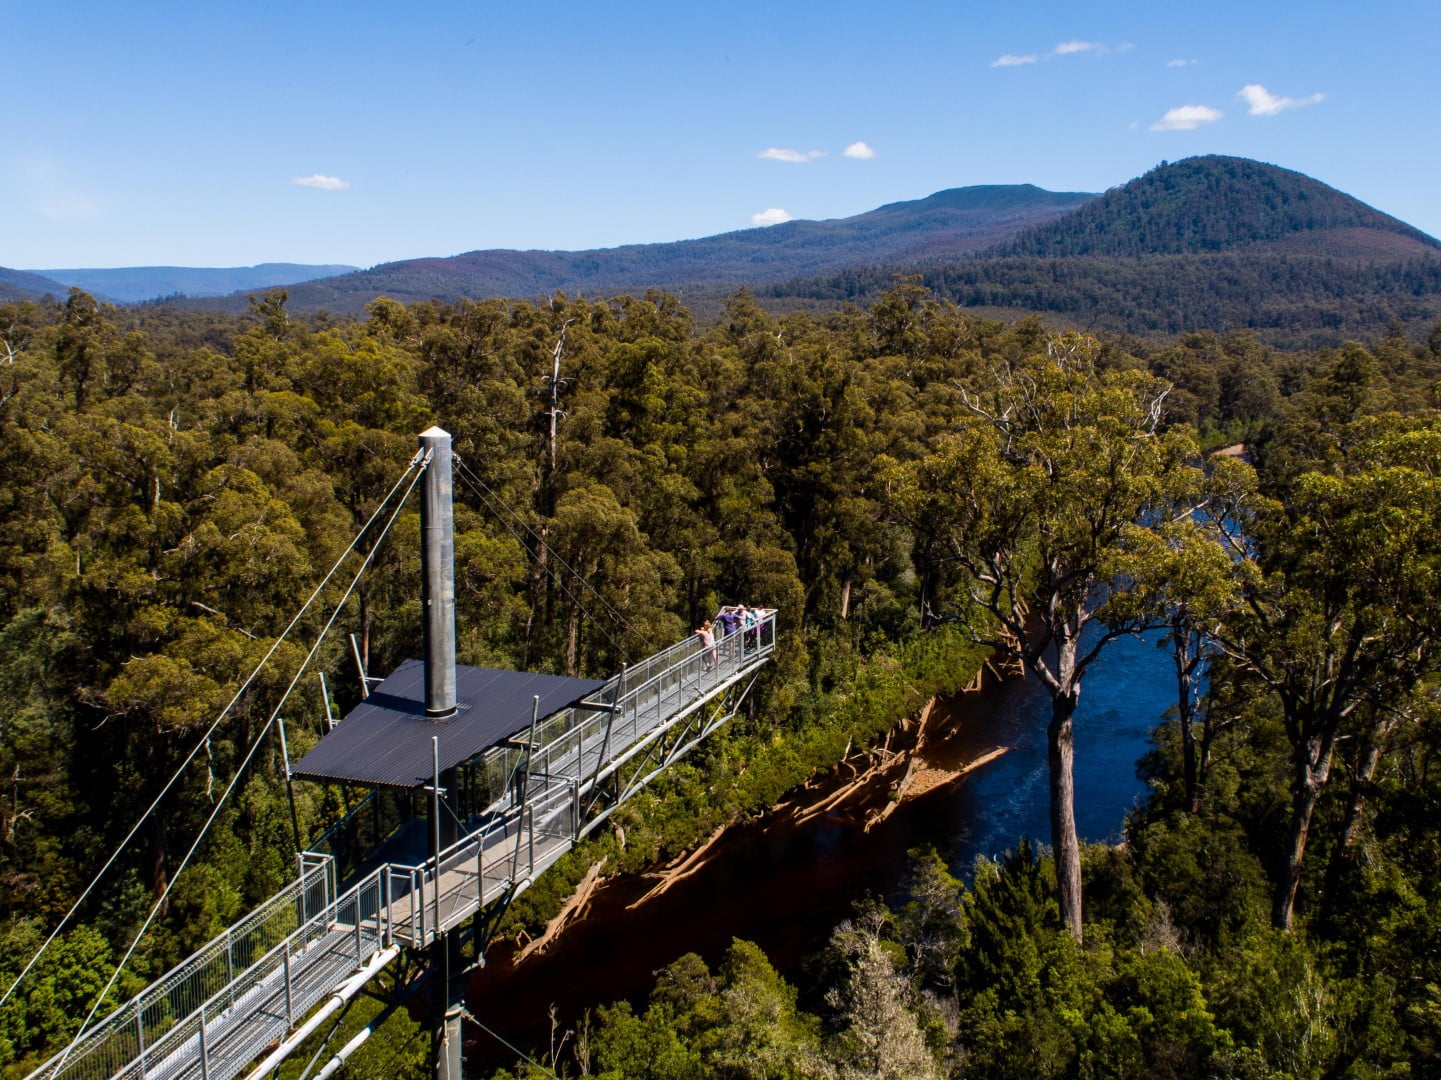 Our day tour highlight is the cantilever over the Tahune rainforest